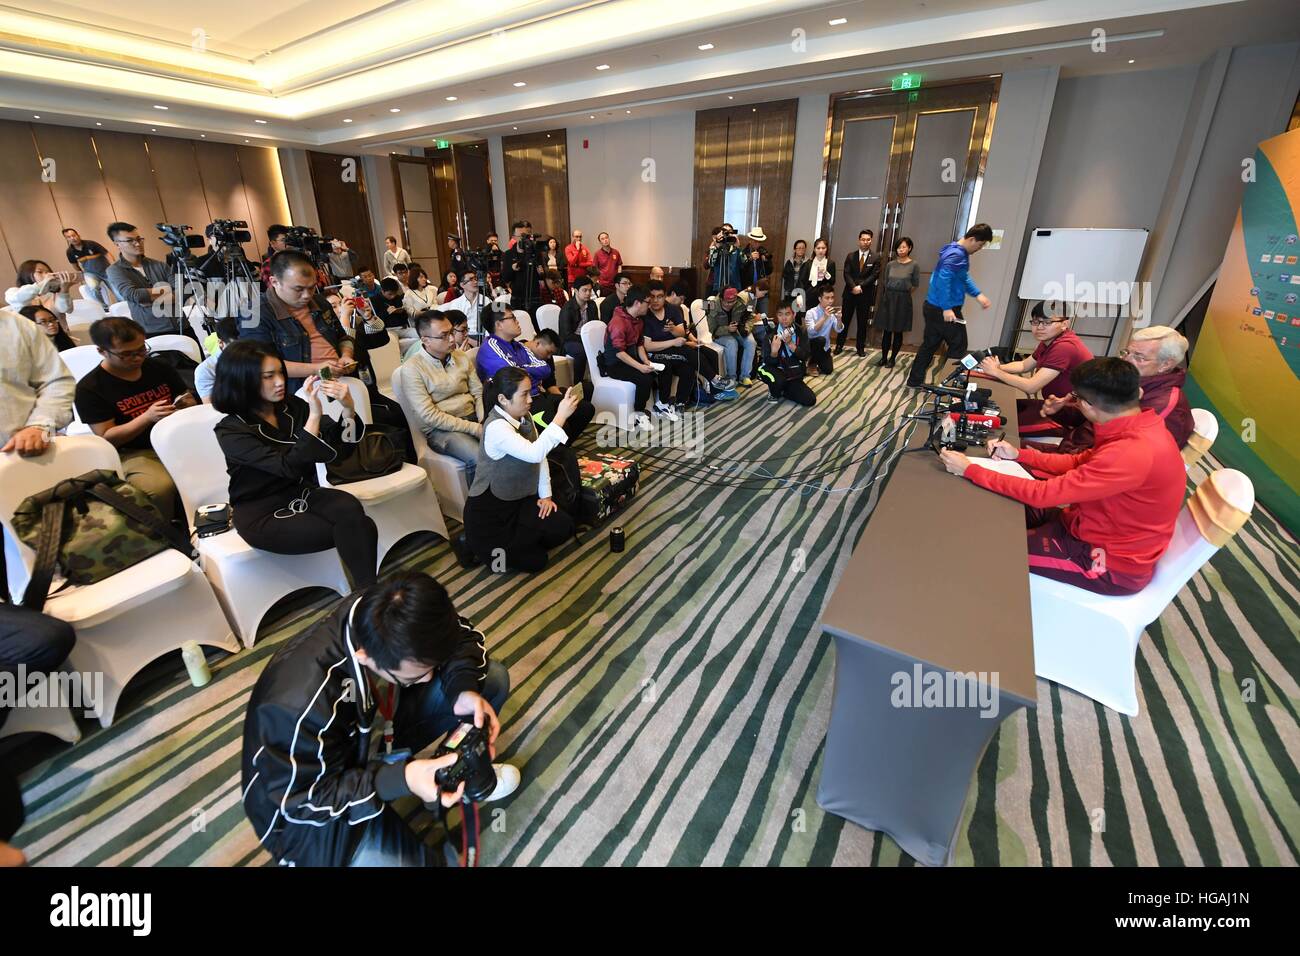 Nanning, Nanning, China. 6th Jan, 2017. Nanning, CHINA-January 6 2017: (EDITORIAL USE ONLY. CHINA OUT) Marcello Lippi, coach of Chinese football team, attends a press conference before China Cup 2017 in Nanning, capital of southwest China's Guangxi Zhuang Autonomous Region, January 6th, 2017. Lippi said that Chinese football team would try their best and they would train and select more young football players during the China Cup 2017. © SIPA Asia/ZUMA Wire/Alamy Live News Stock Photo